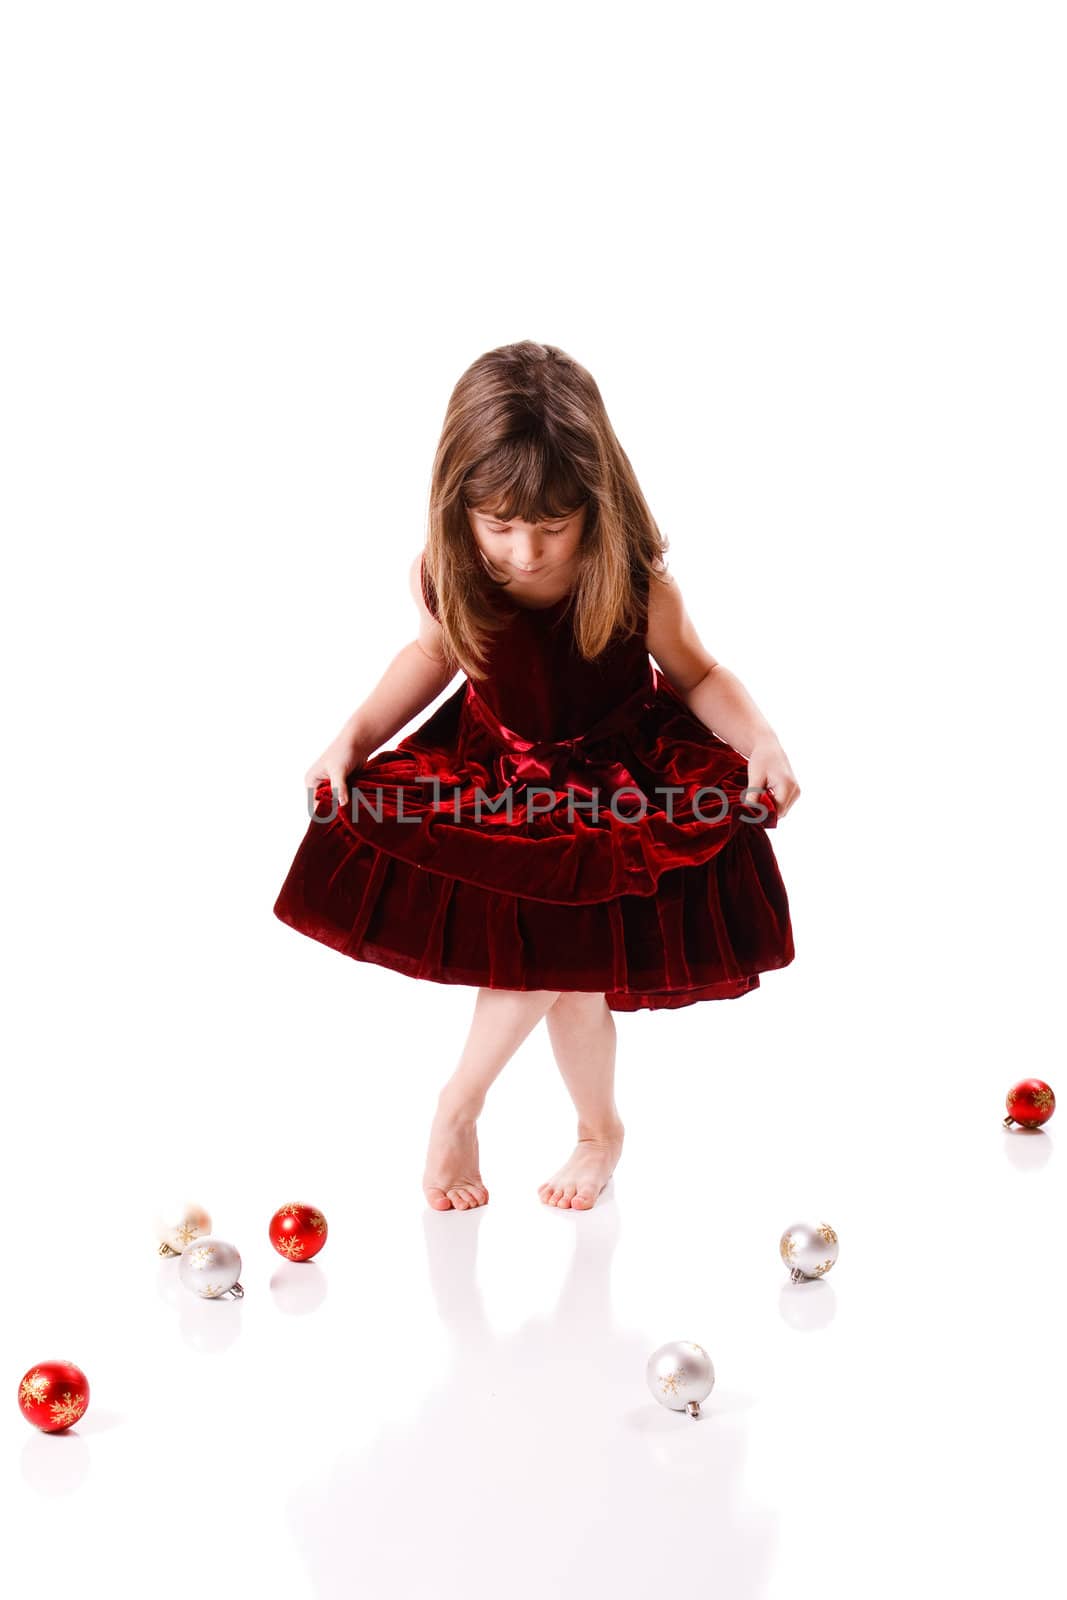 Little christmas girl by Talanis